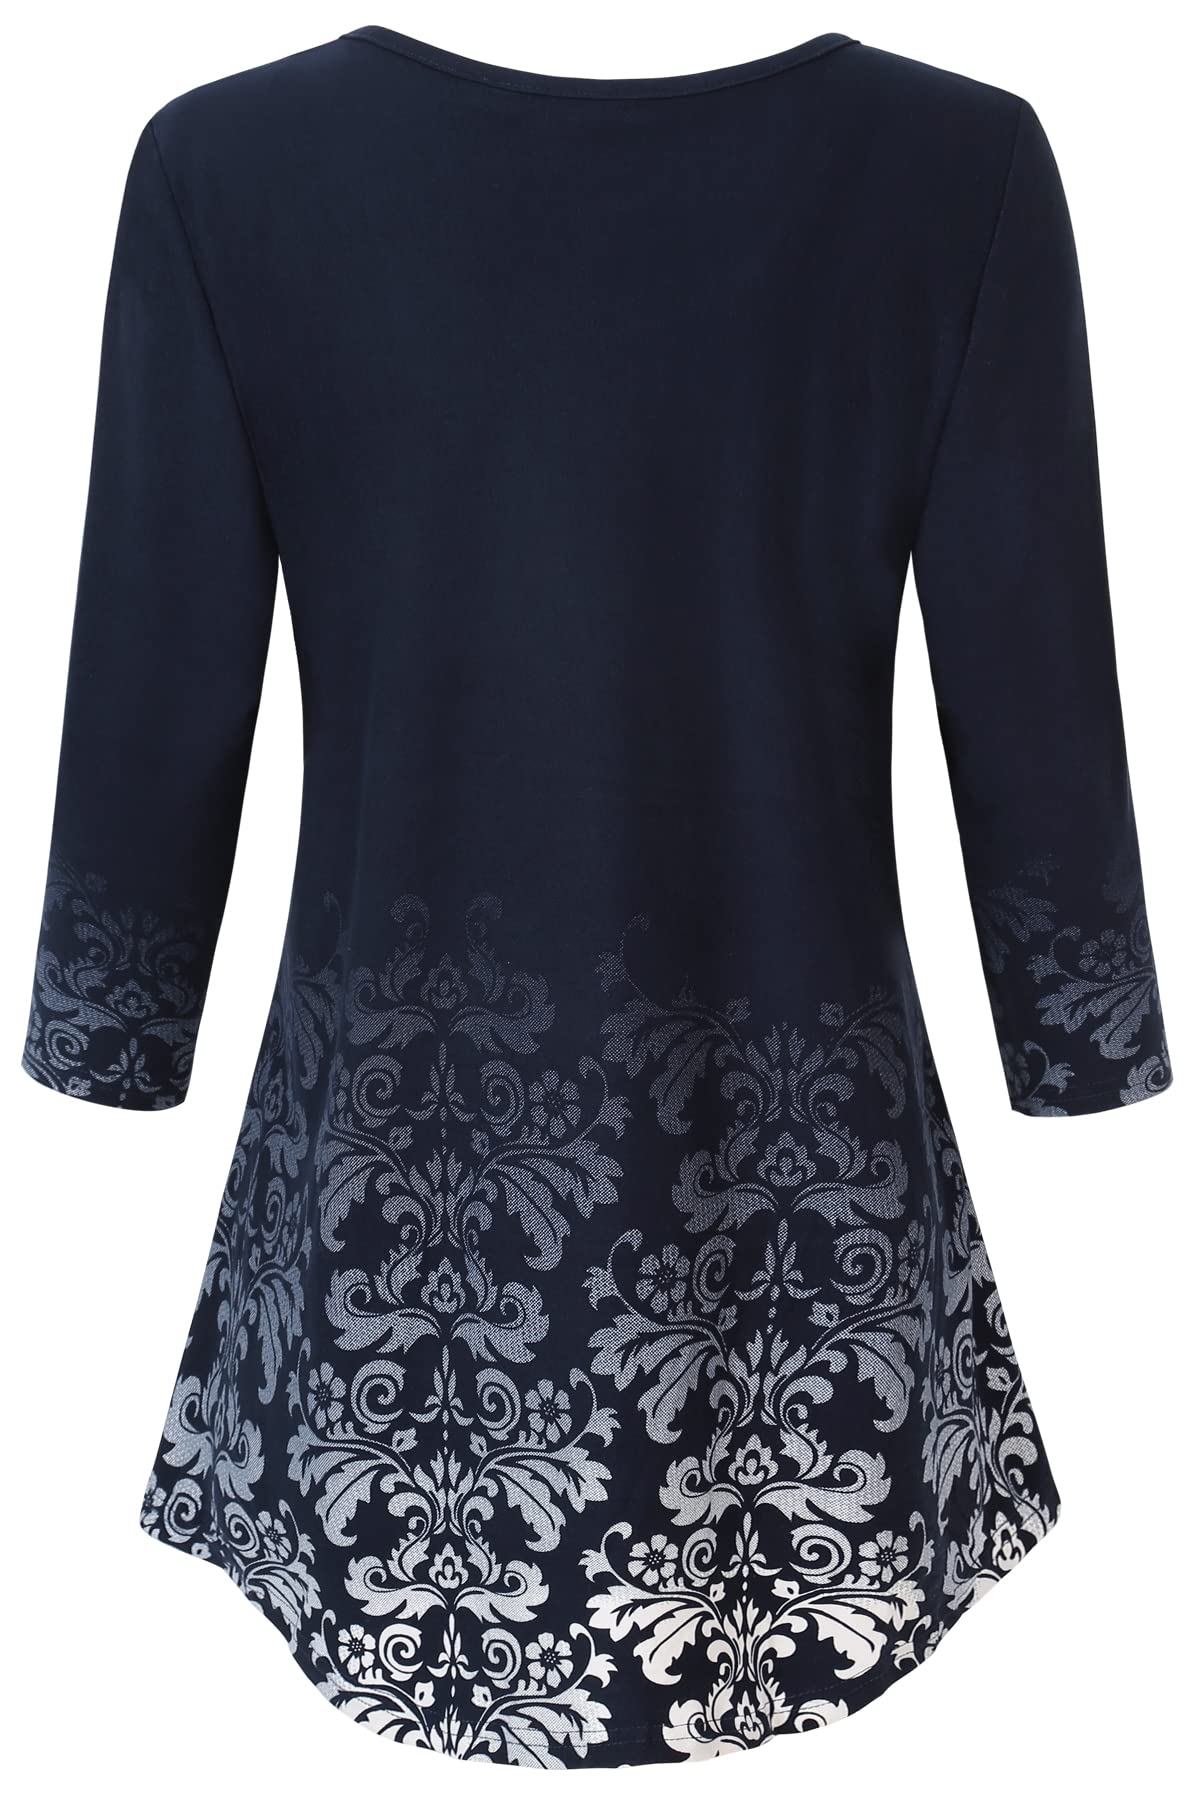 BAISHENGGT Women's  Dark Blue Floral O Neck A line Blouse Floral Lace Tunic Tops